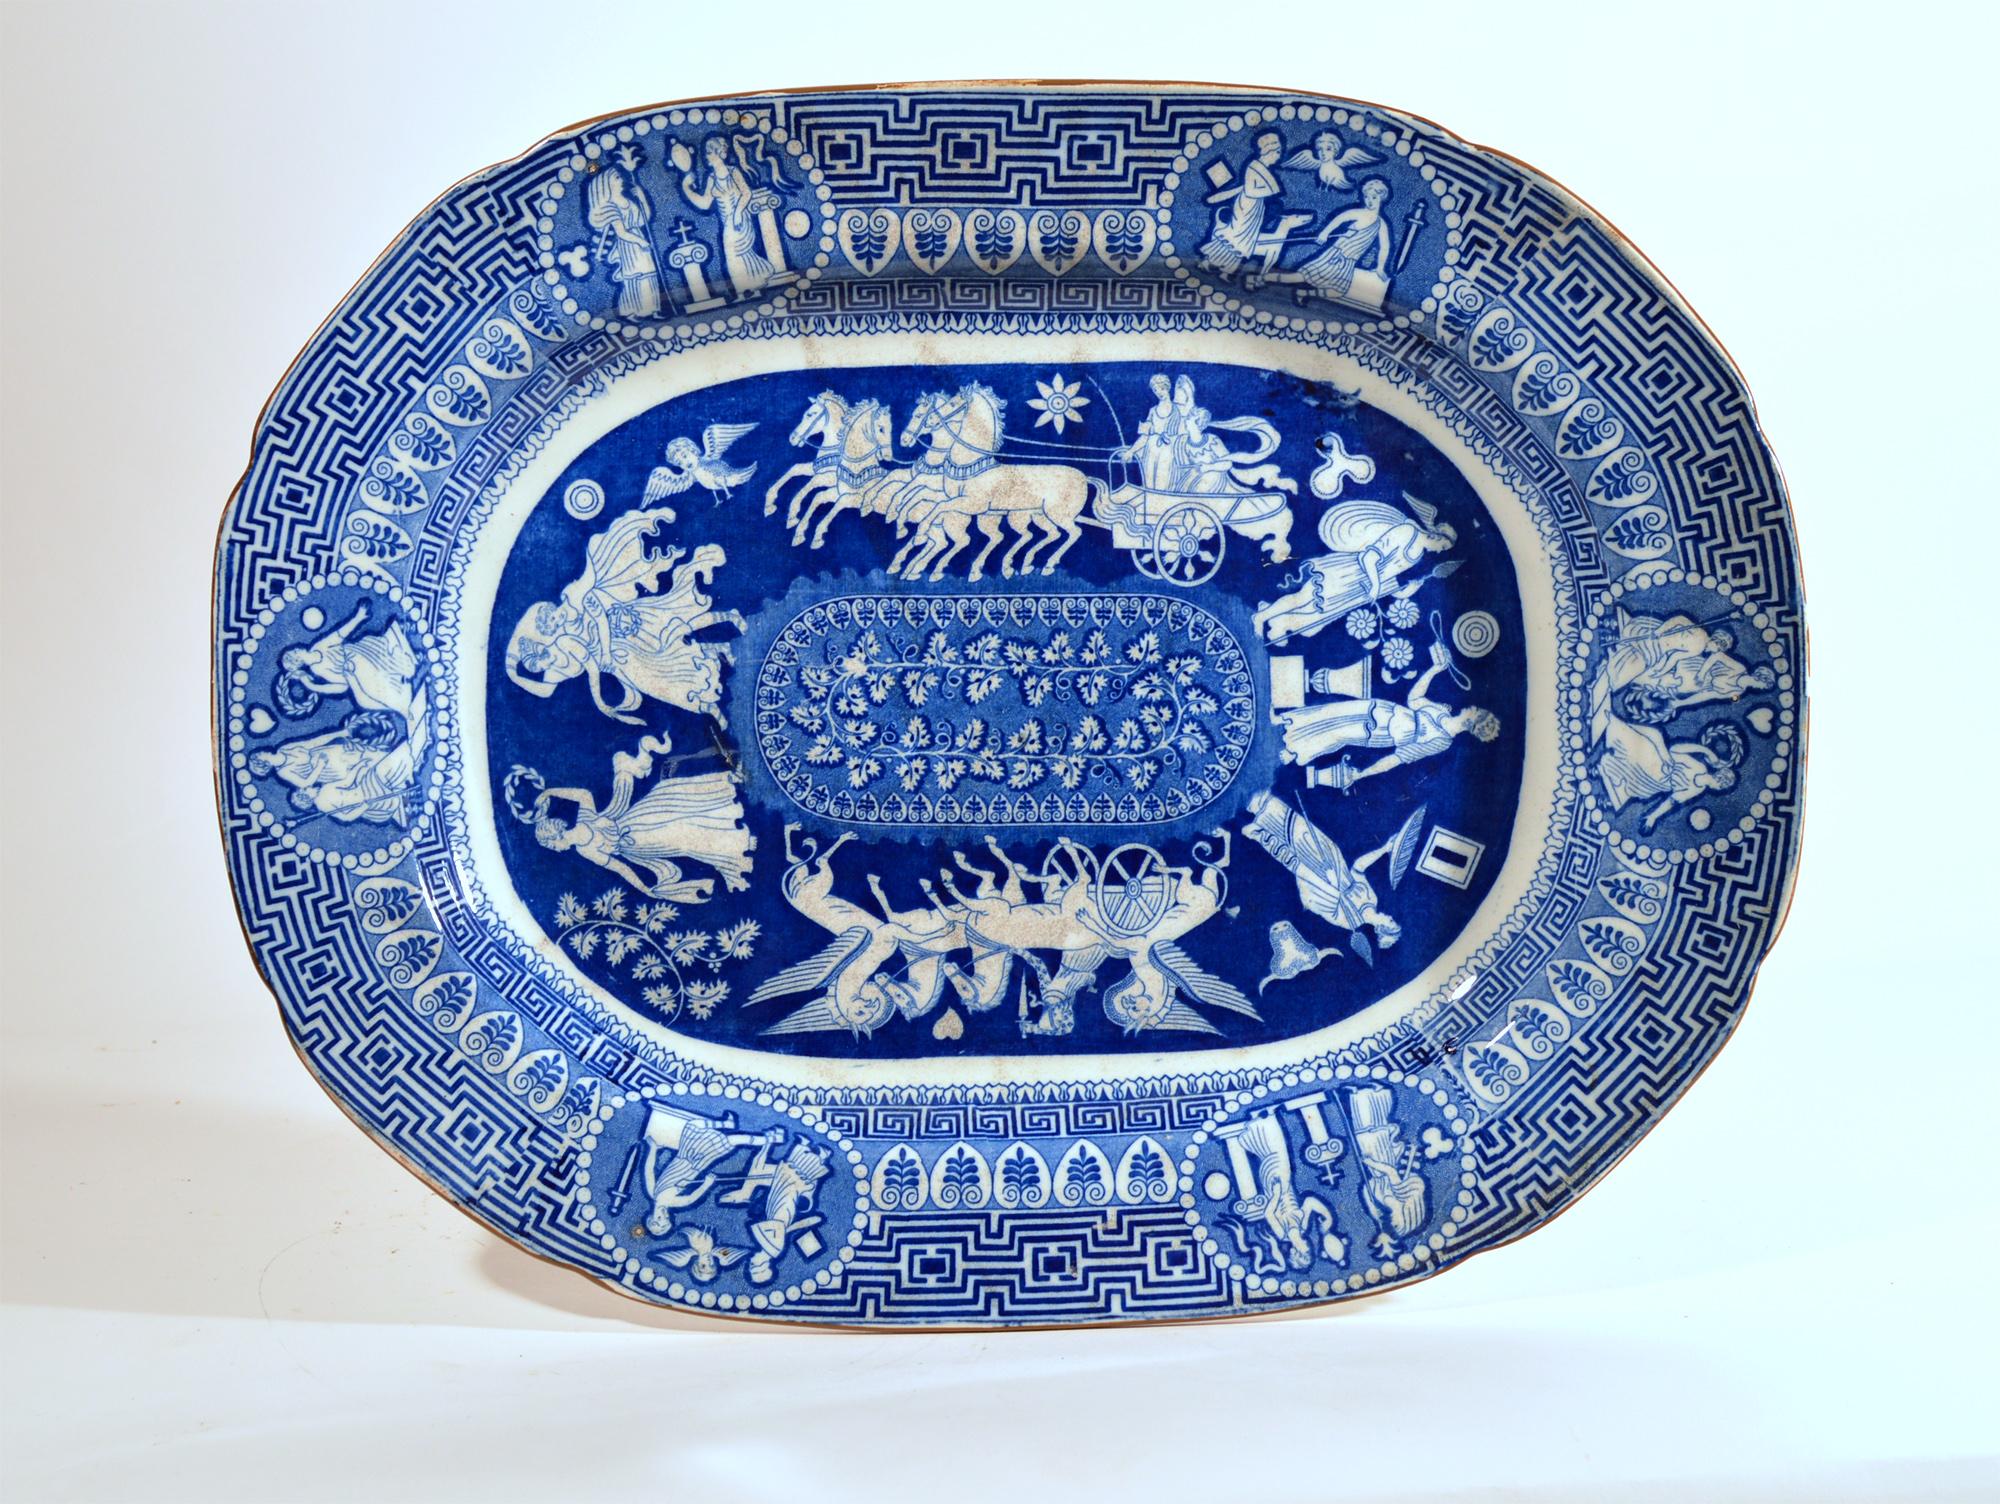 Neoclassical Greek pattern blue printed large dish,
Herculaneum, Liverpool,
Early 19th century

The Herculaneum pottery underglaze blue central pattern shows a series of images encircling an oval panel with a leafy vine. There are two main